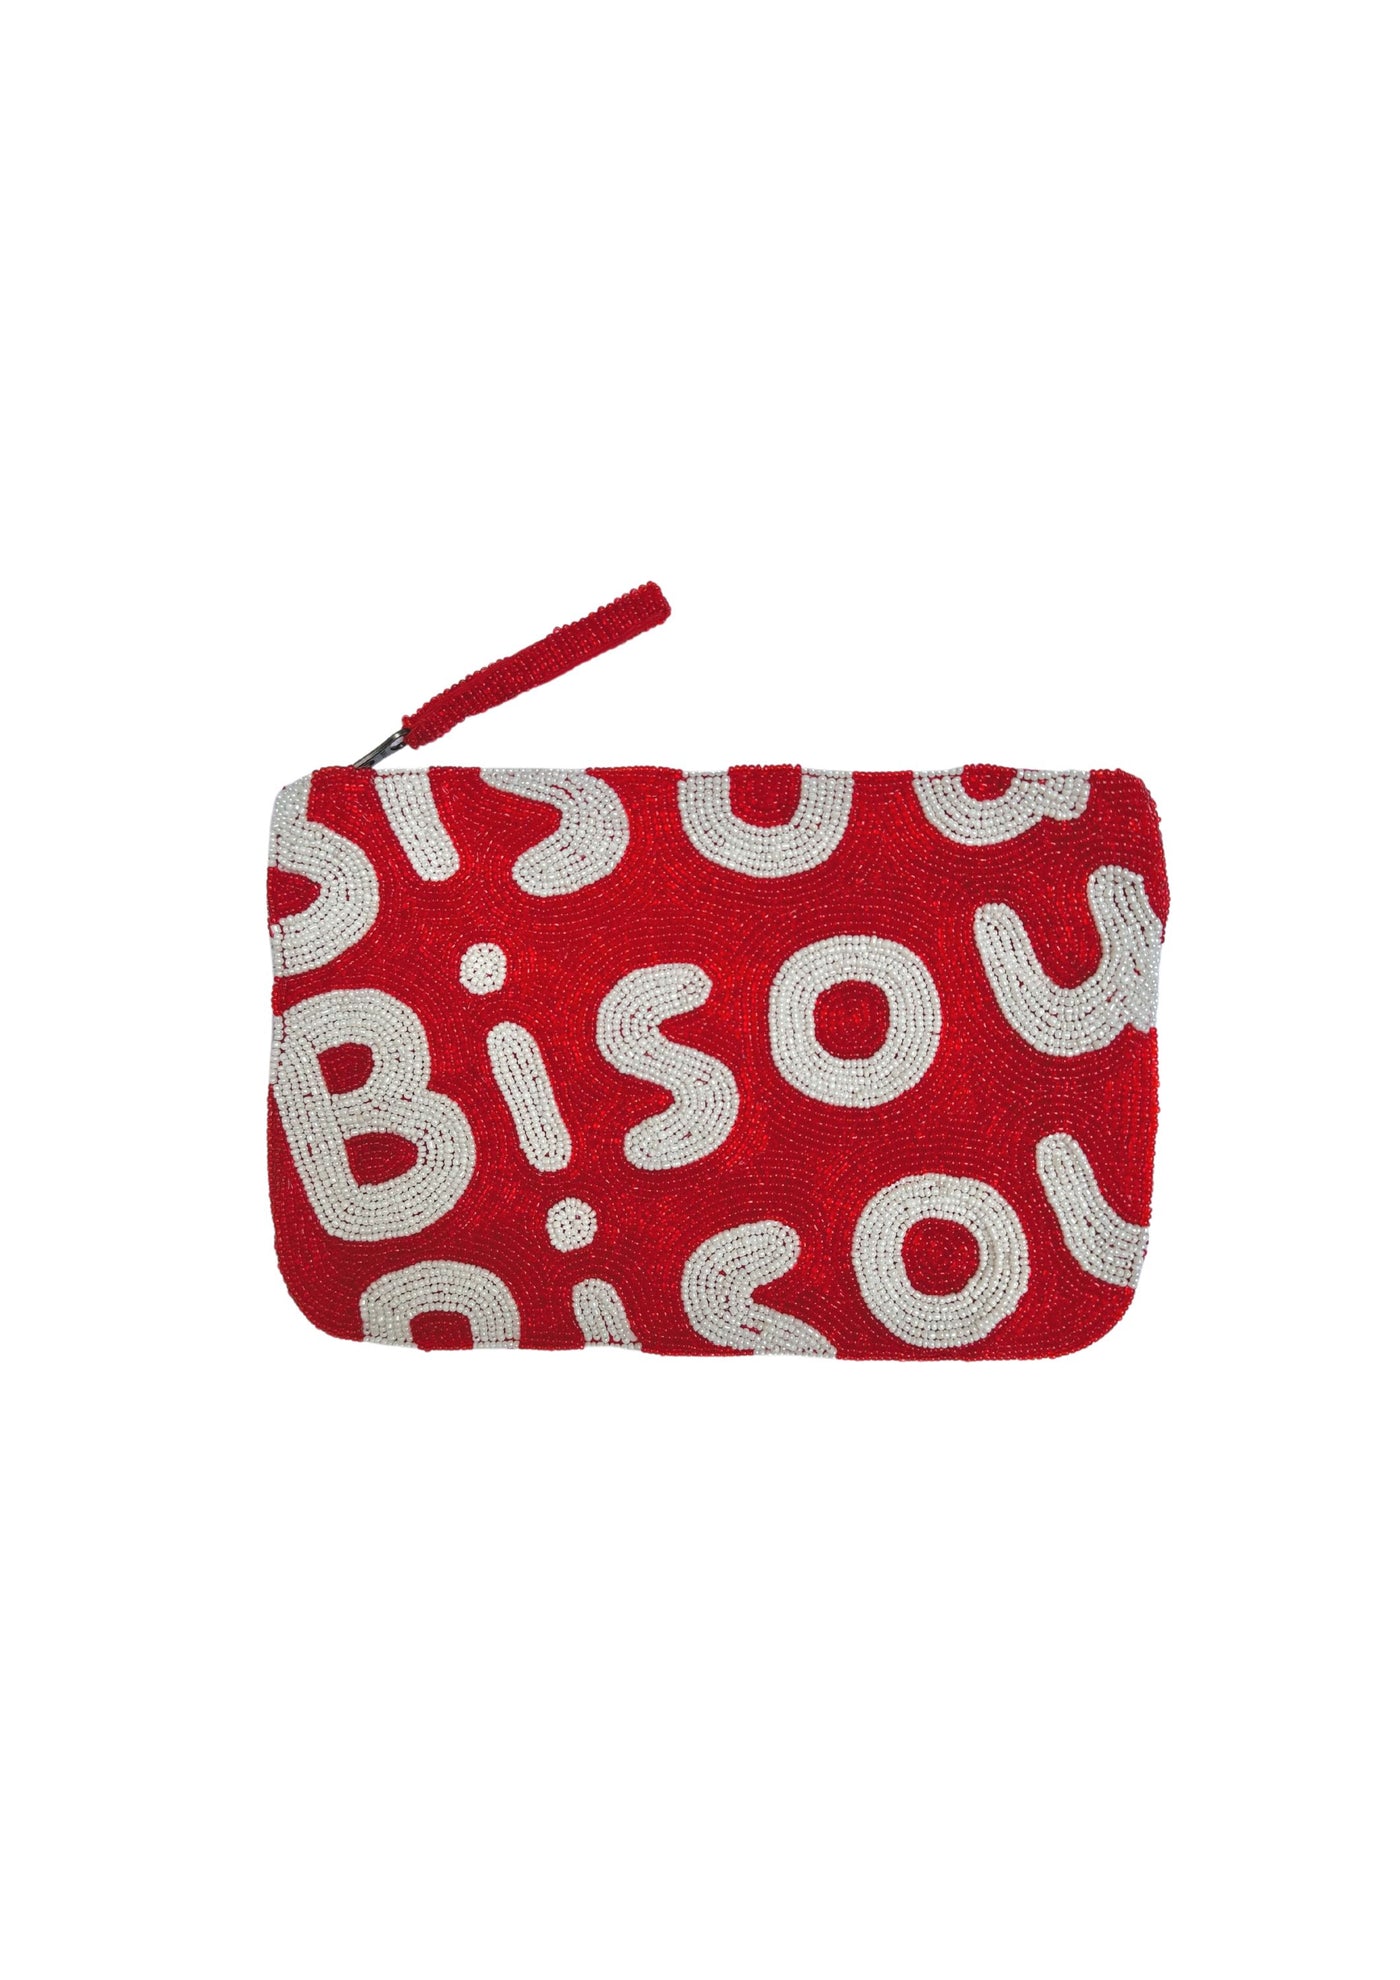 Bisou Bisou - Red and white